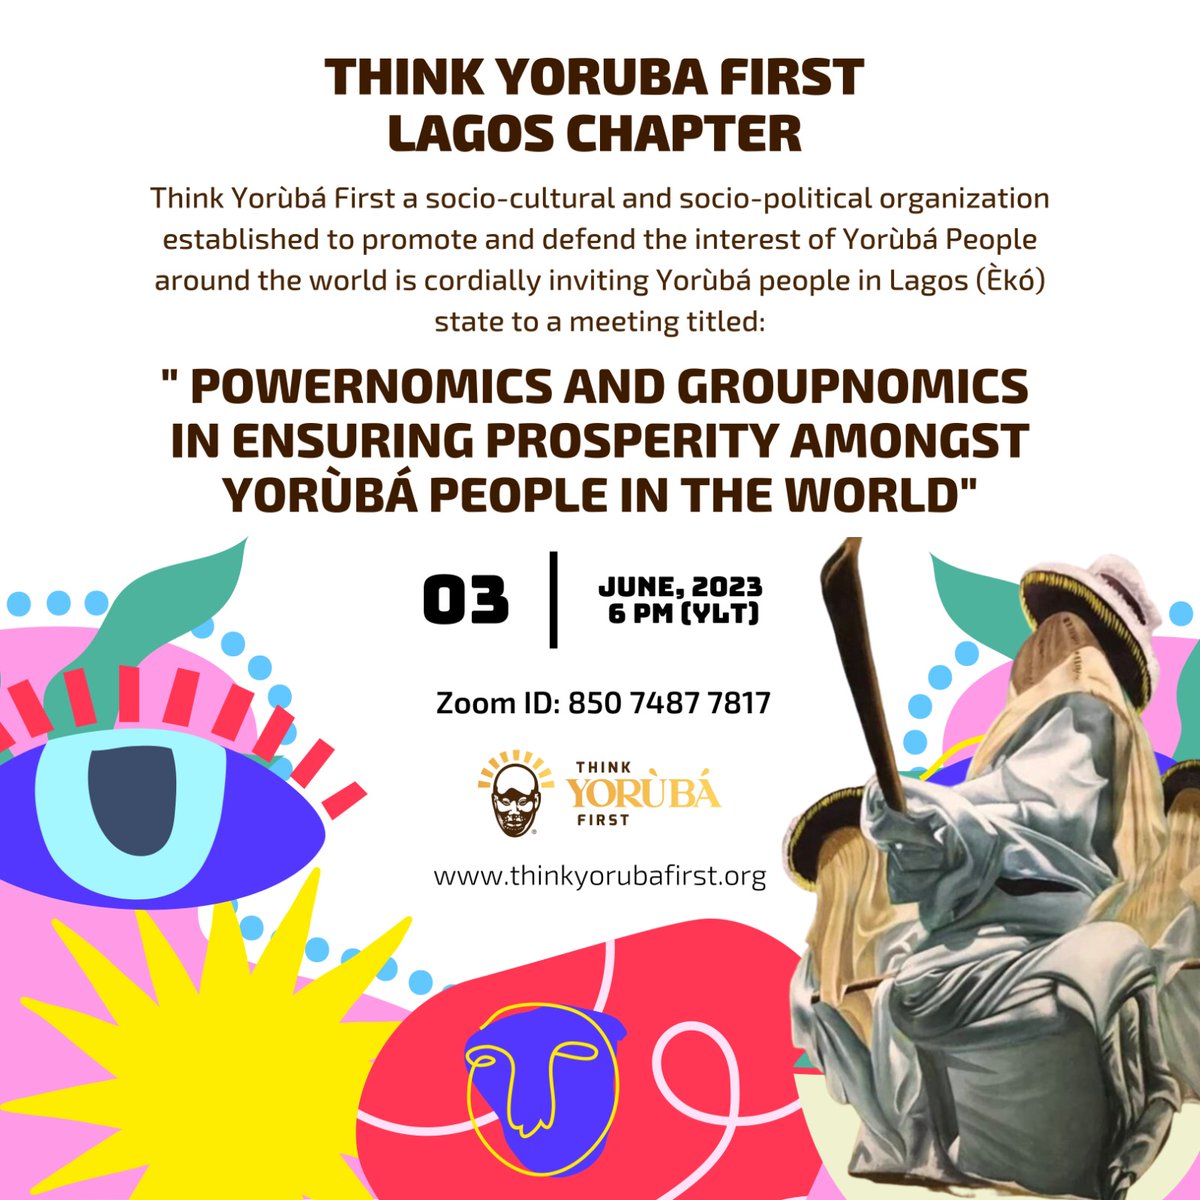 Think Yoruba First Lagos state chapter cordially invites you next week Saturday 03/06/2023 at 6:00 p.m Yorubaland time for a meeting of Yoruba conservatives in Lagos state.

Theme: Powernomics and groupnomics in ensuring  prosperity among Yoruba people in the world.

Please…